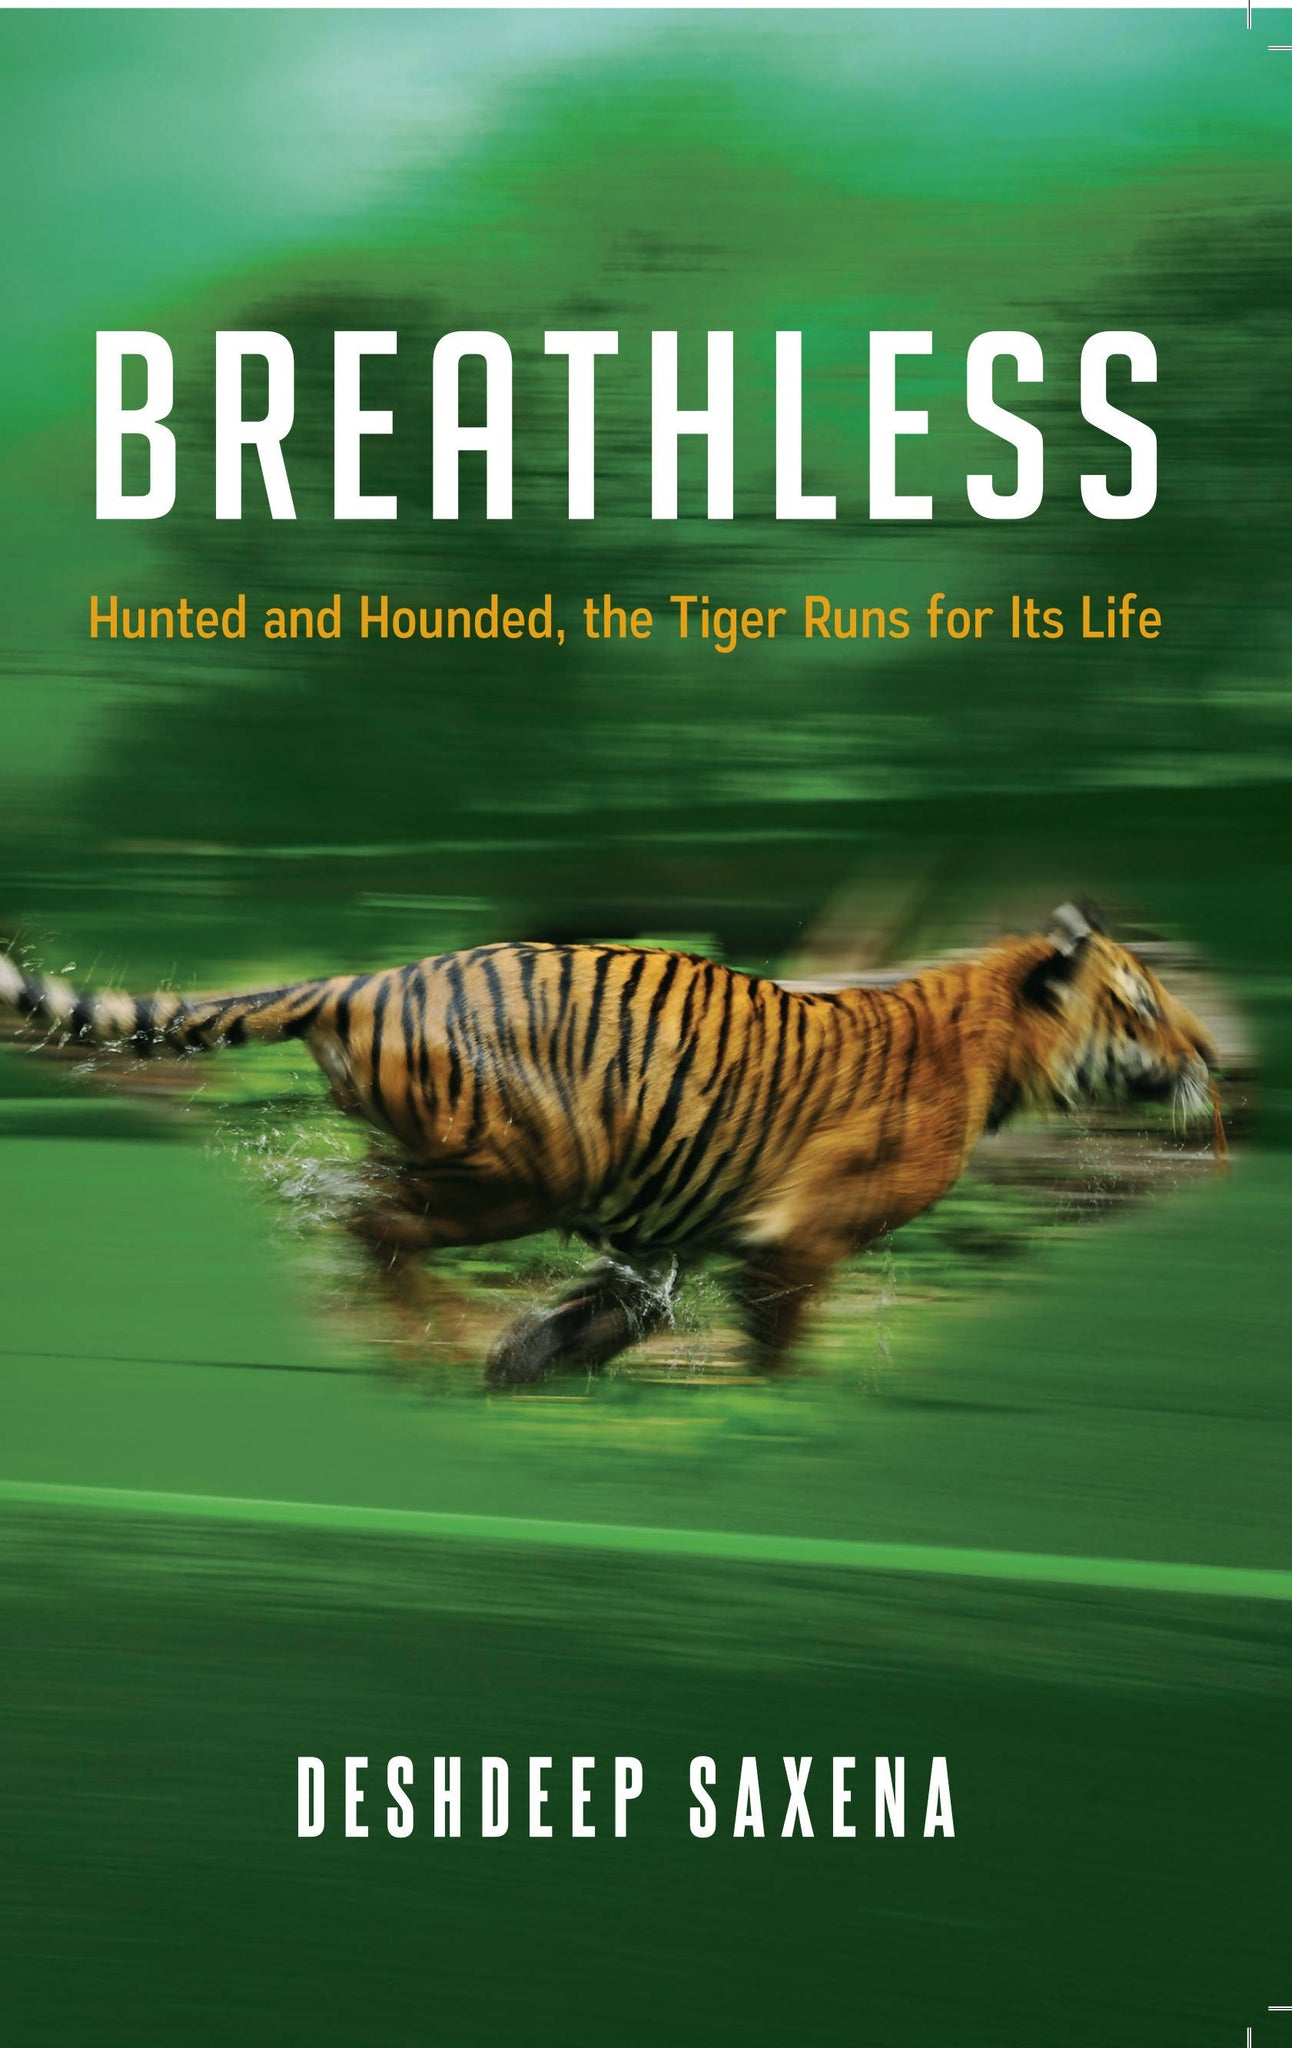 BREATHLESS: Hunted and Hounded, the Tiger Runs for Life